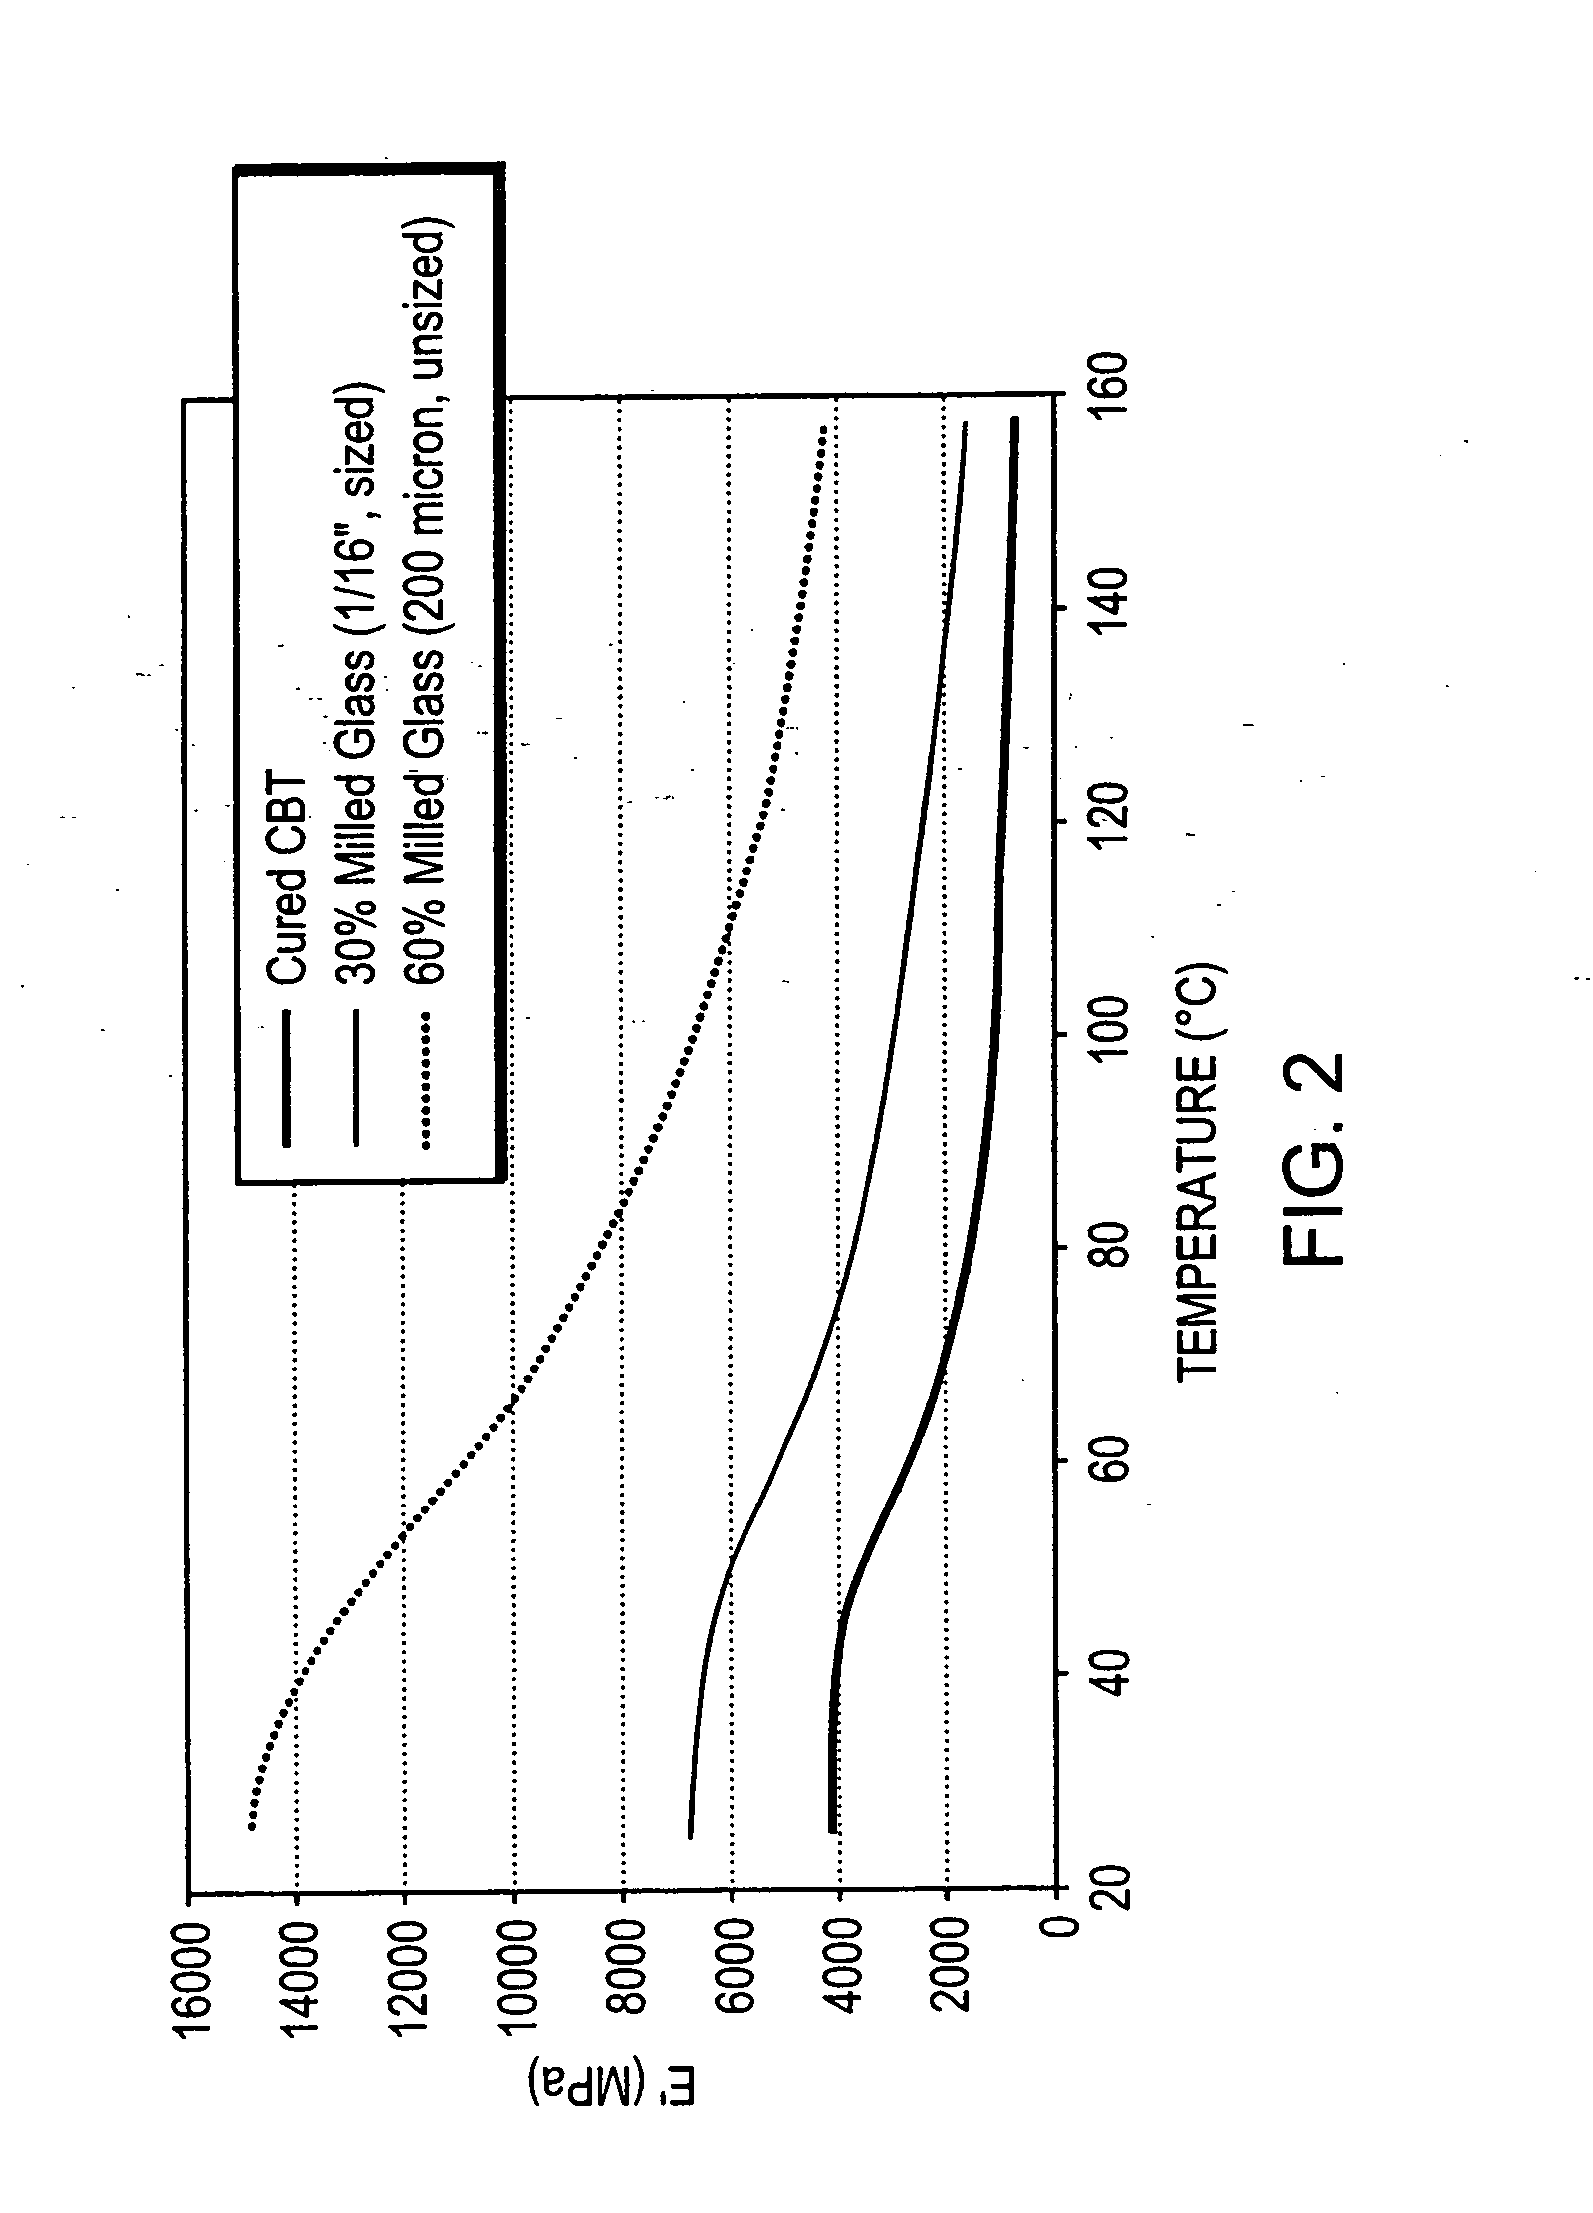 Intimate physical mixtures containing macrocyclic polyester oligomer and filler